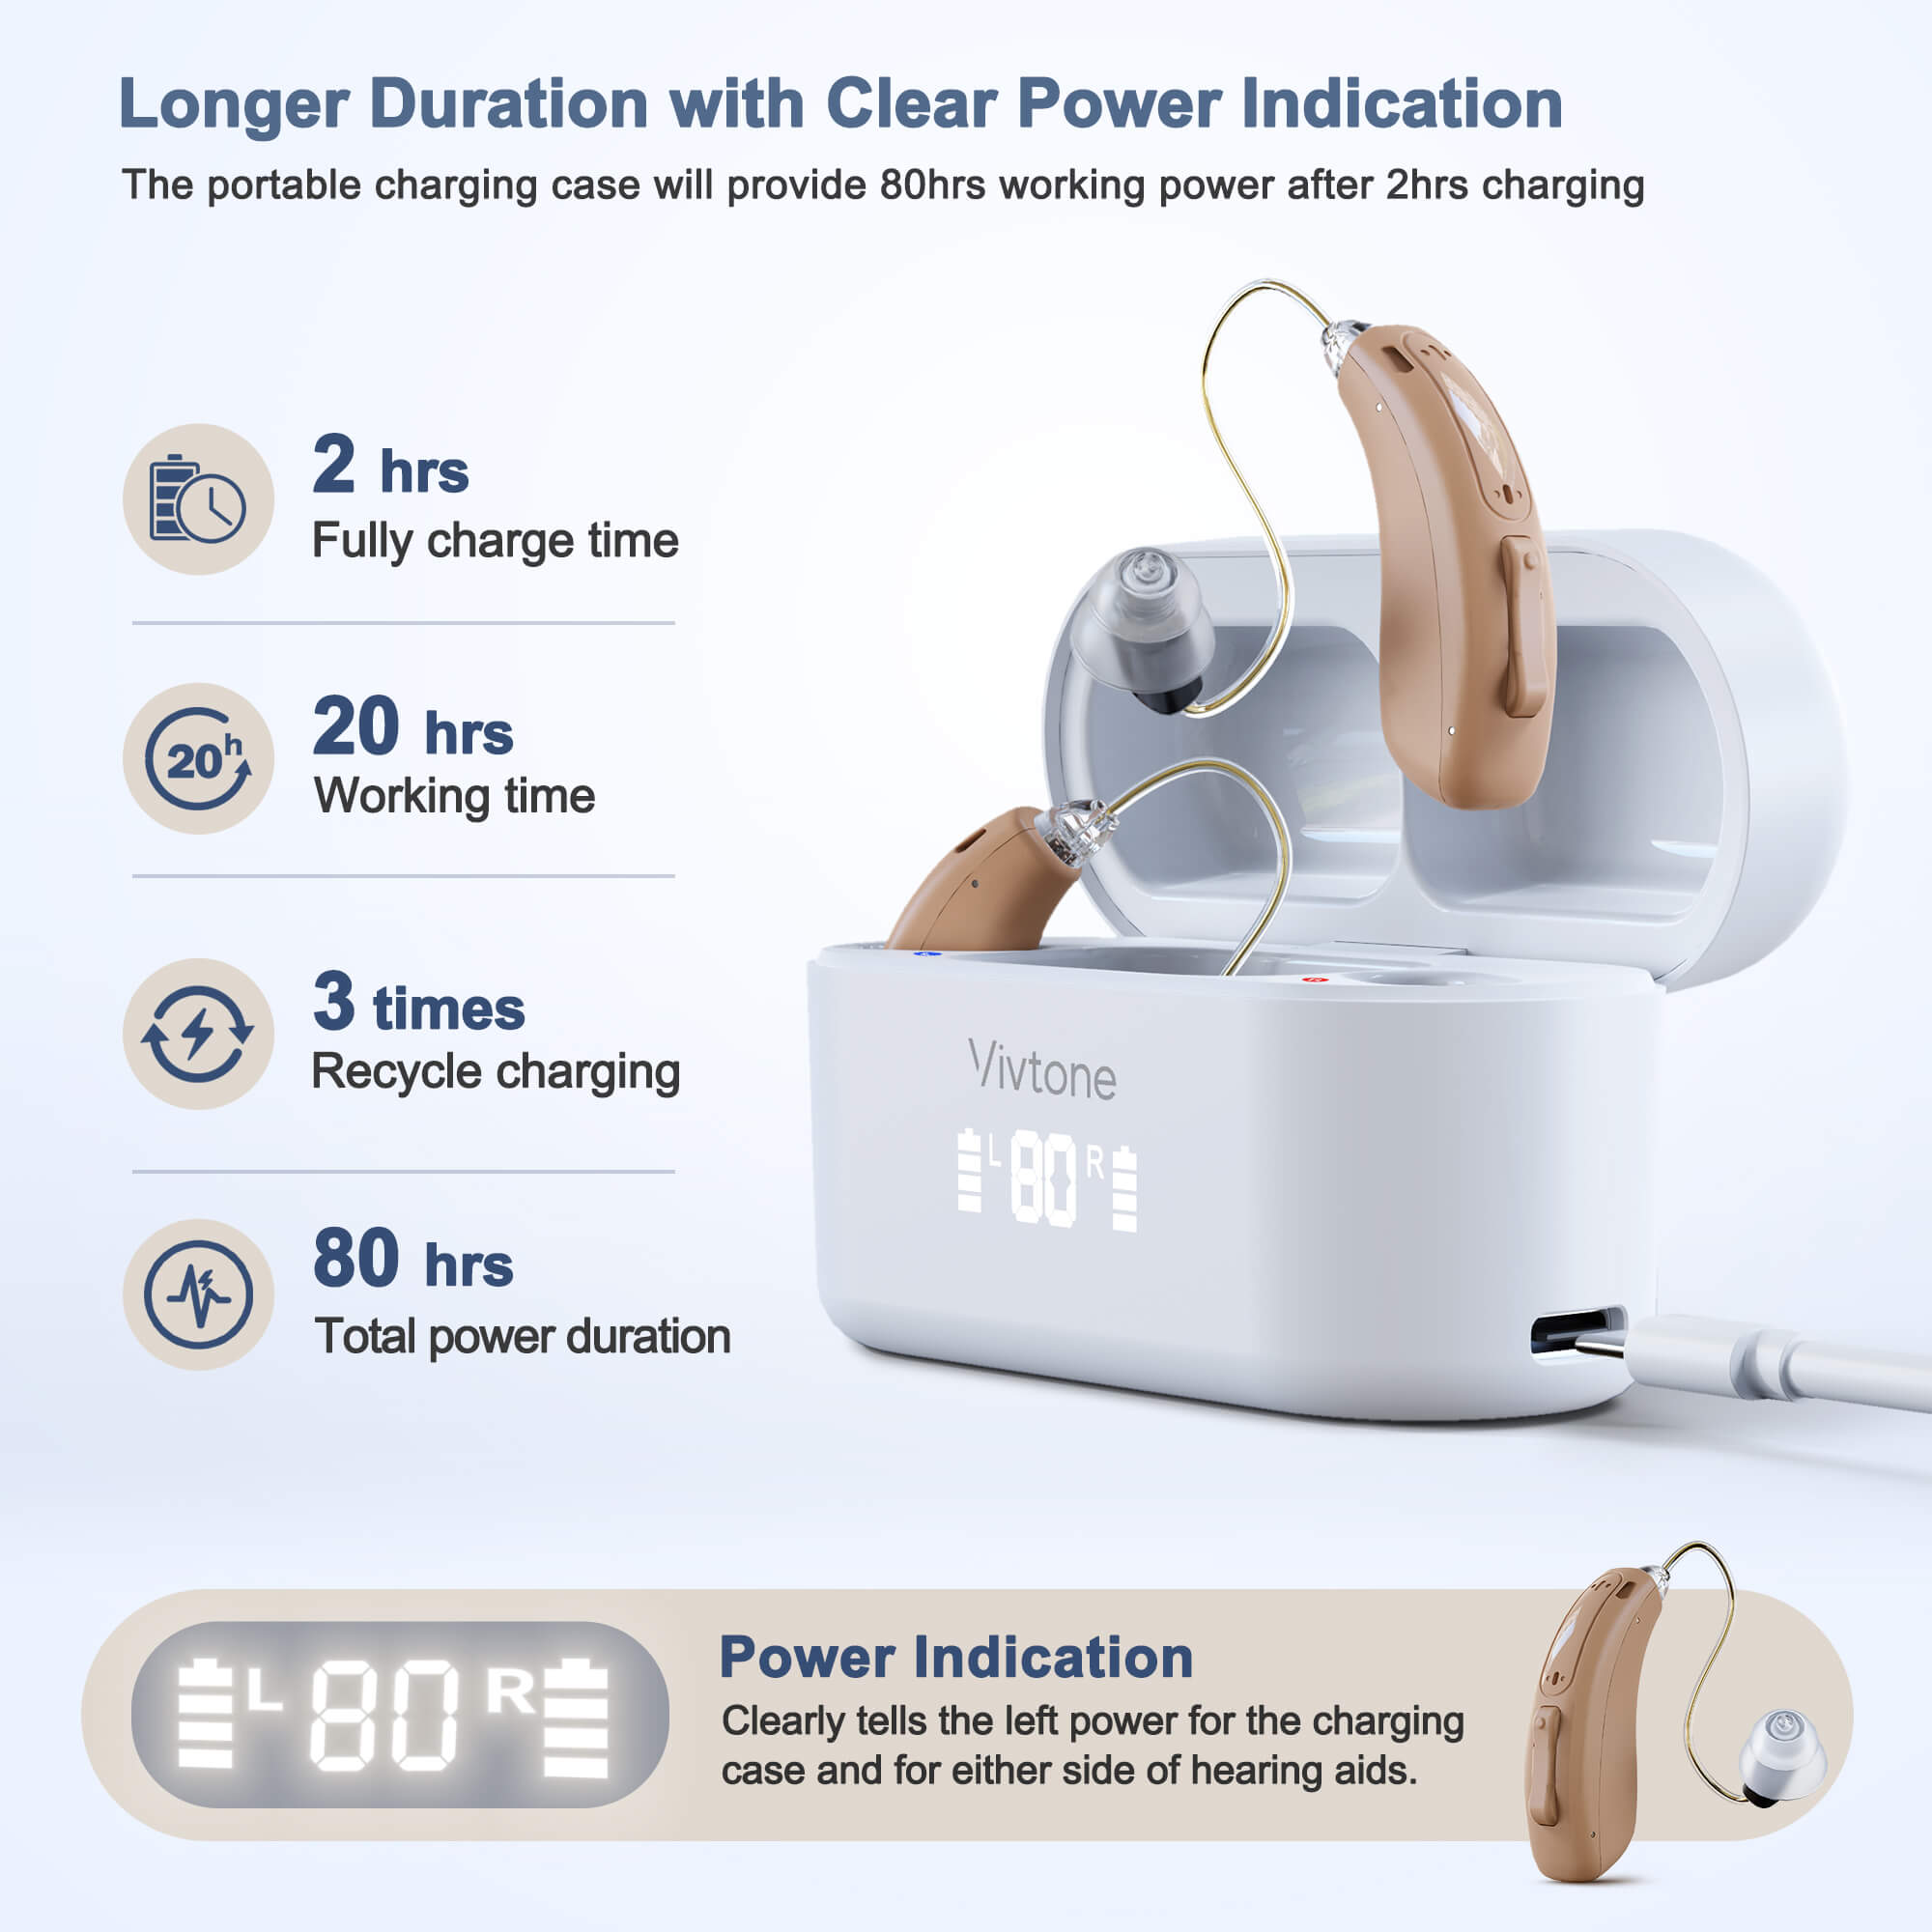 4. vivtone lucid516 ric hearing aids-longer duration with power indication